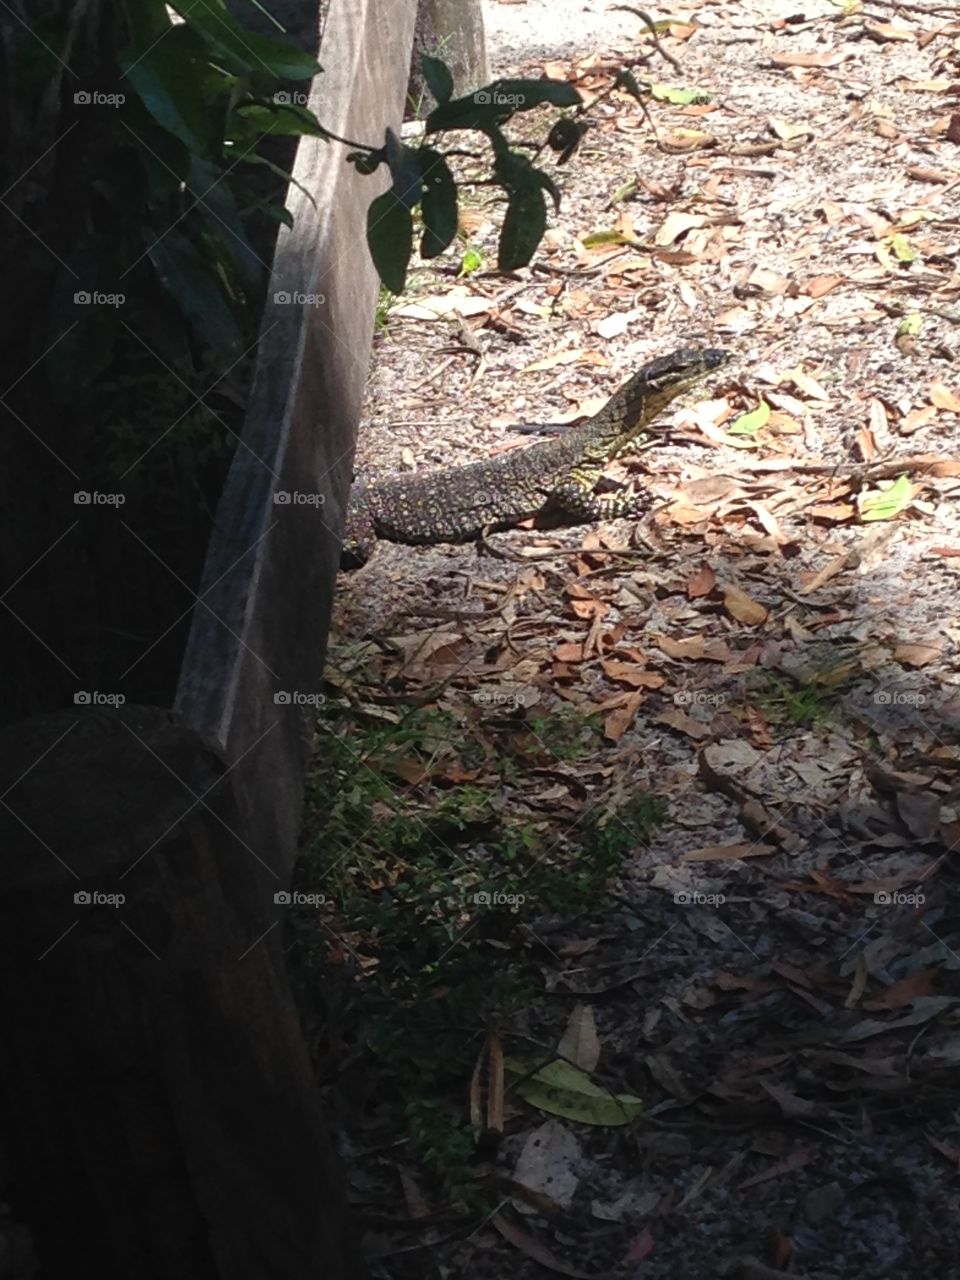 Lizard spotted on Fraser Island